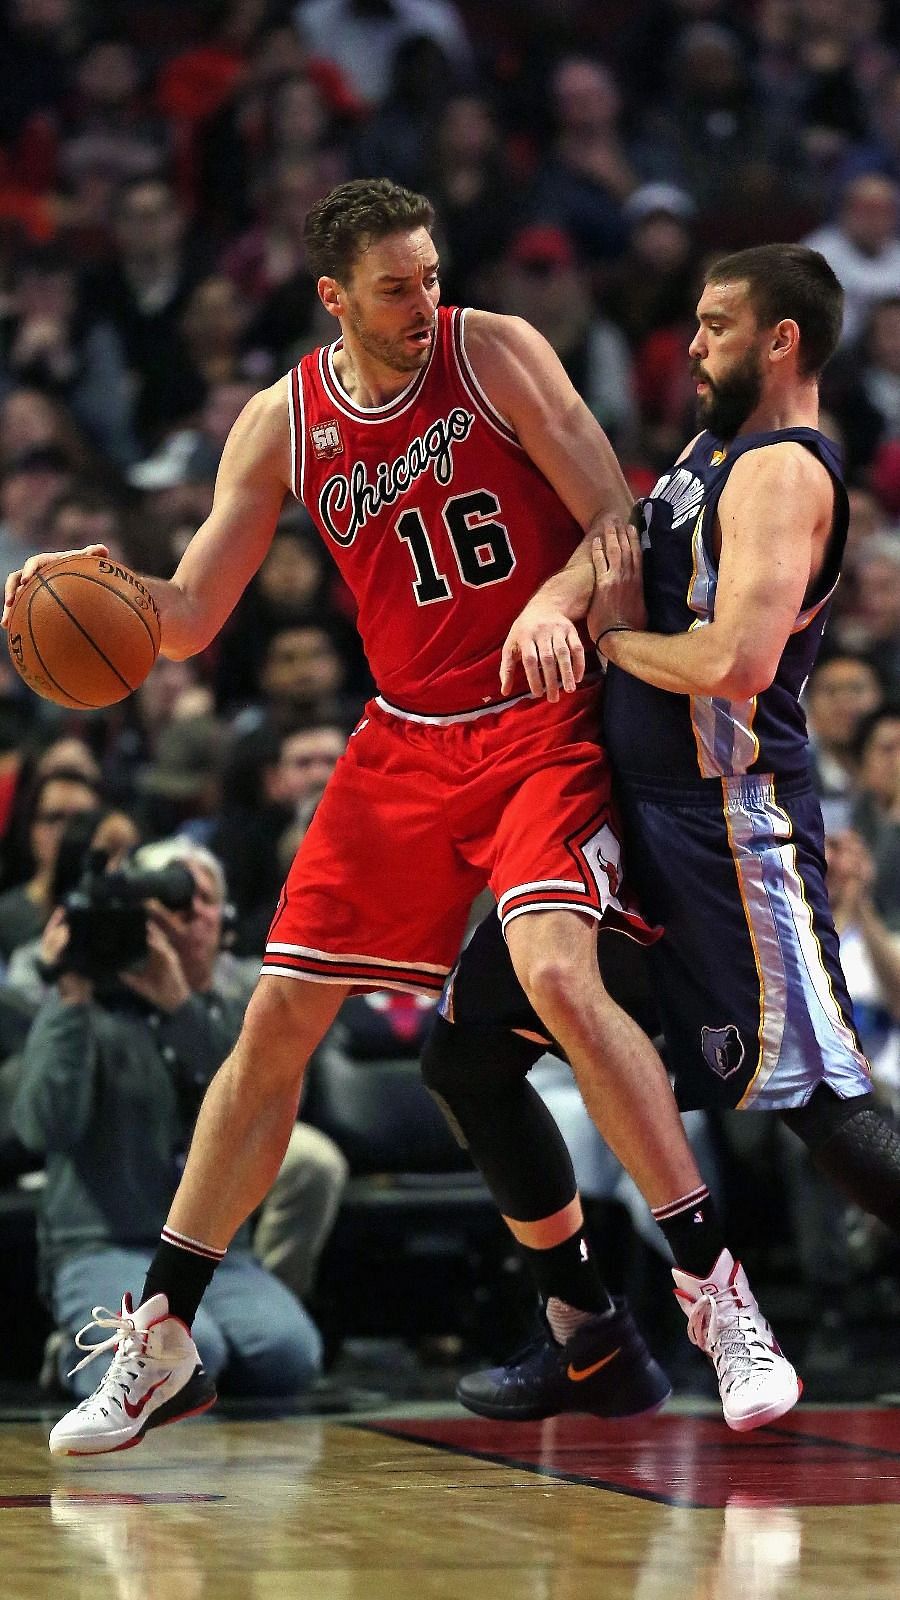 Nba News Pau Gasol Wants To Join Brother On La Lakers Play For Spain In 2021 Olympics